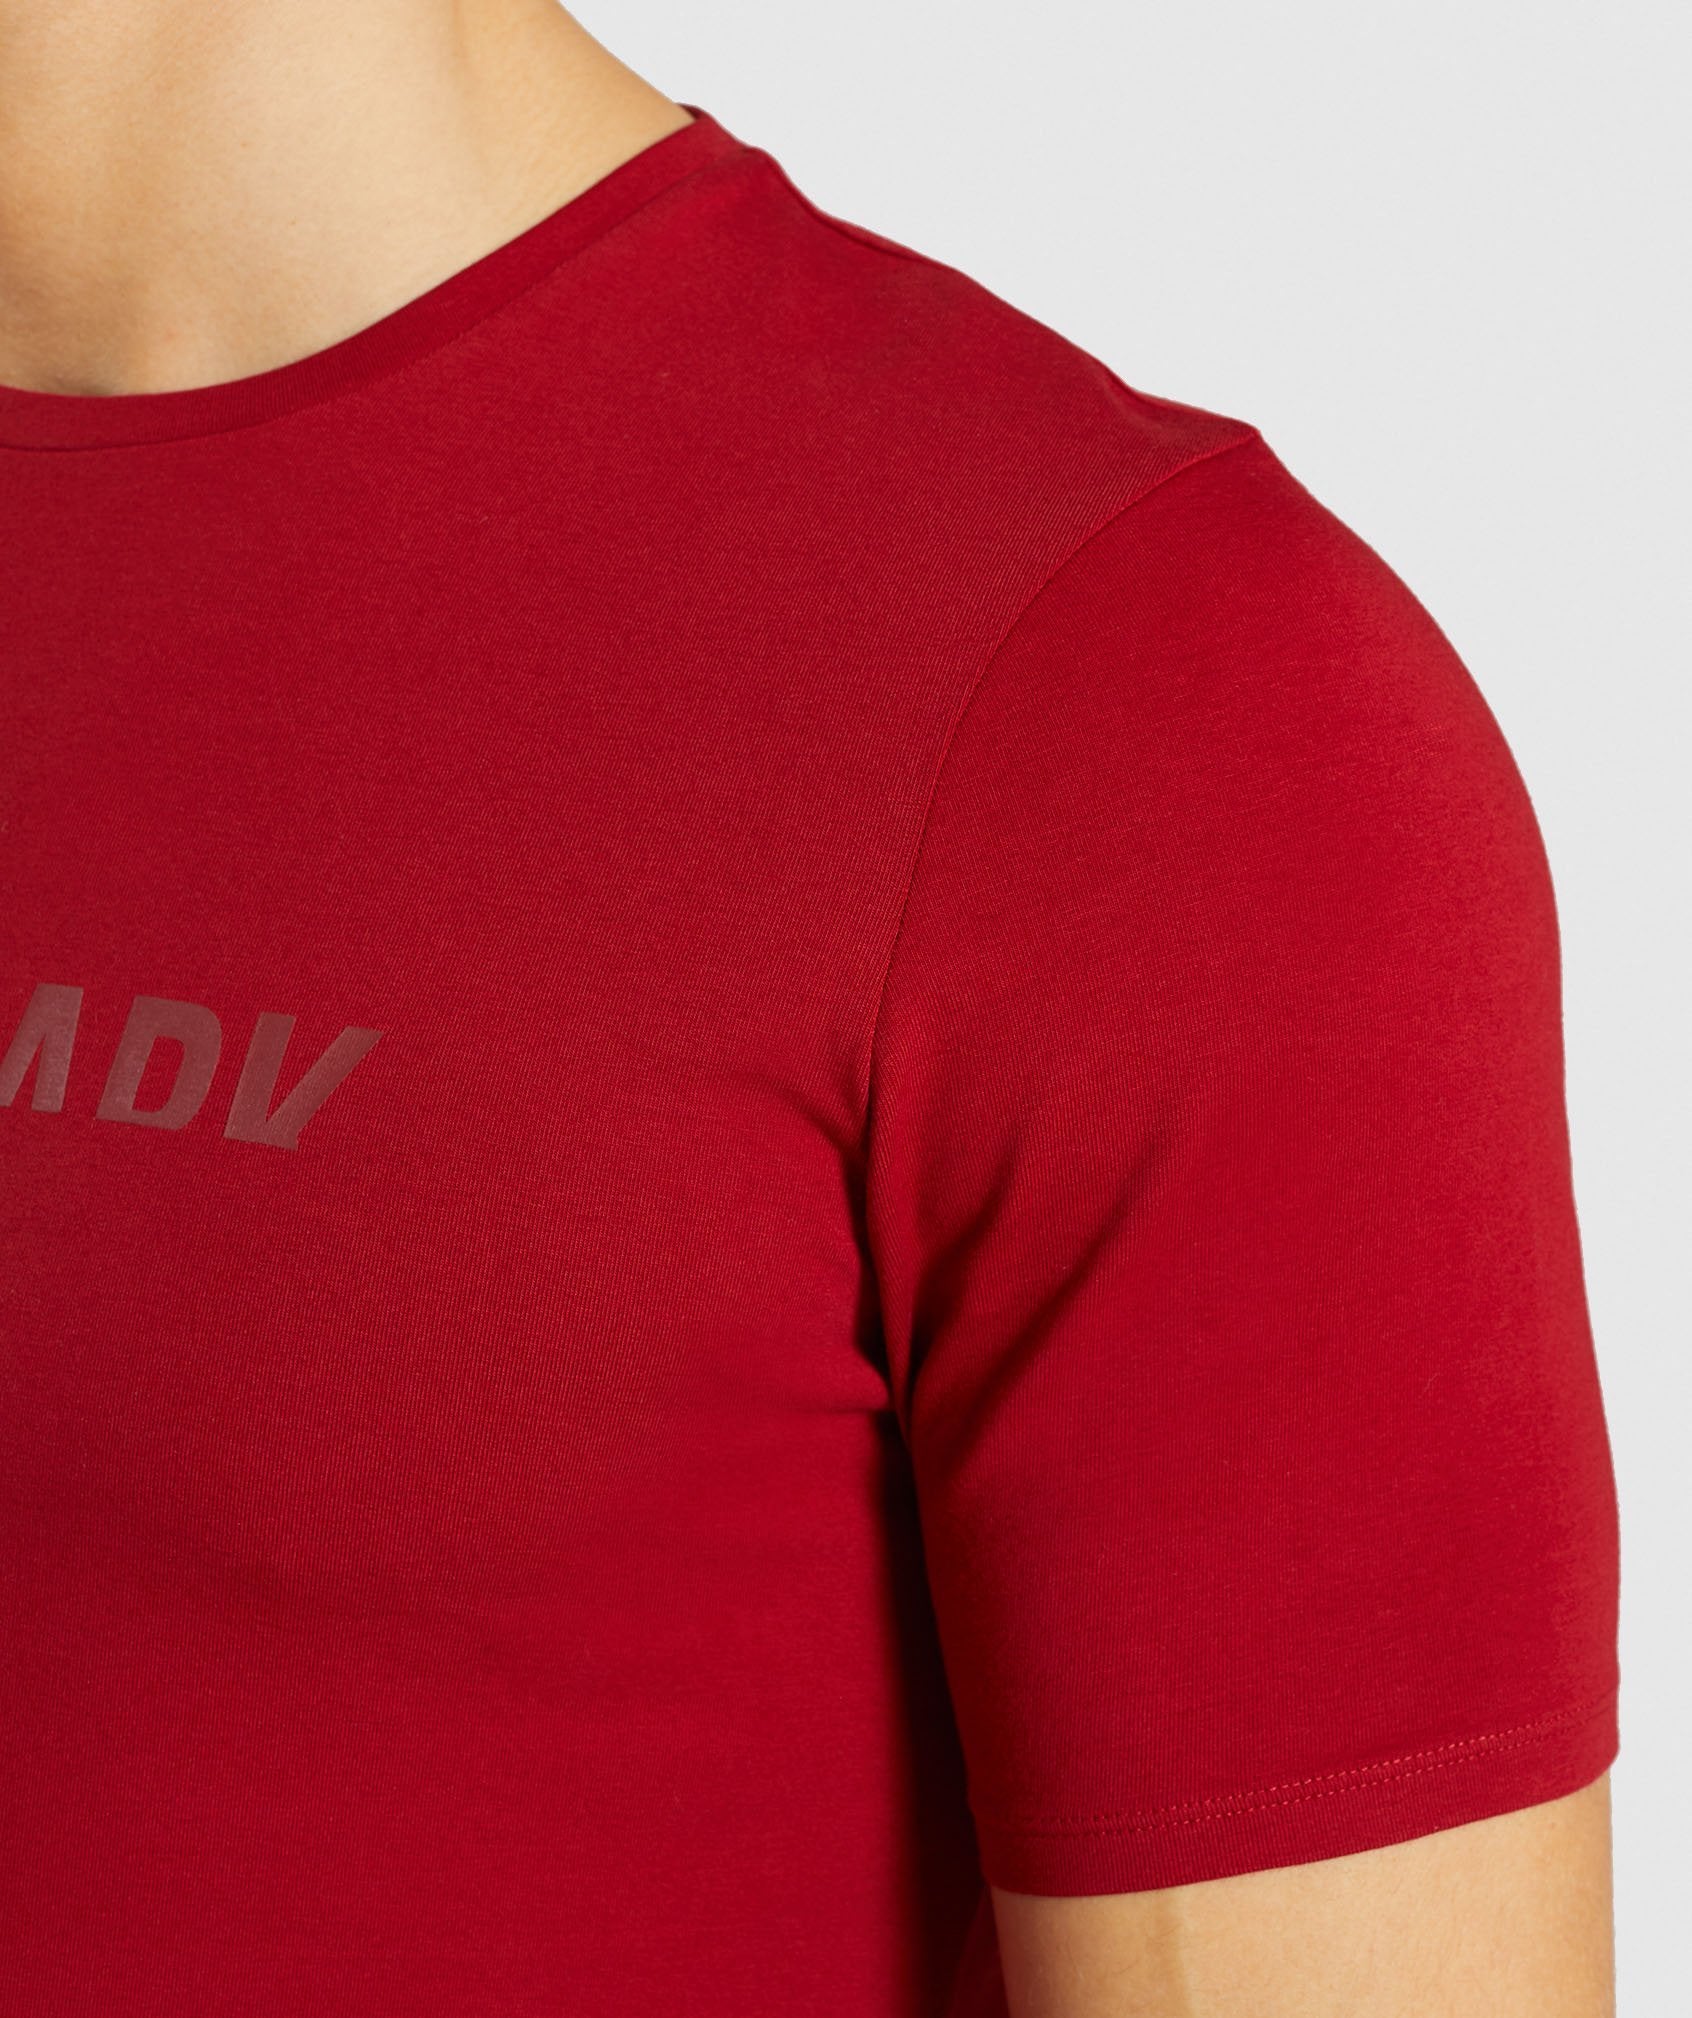 Divide T-Shirt in Full Red - view 6